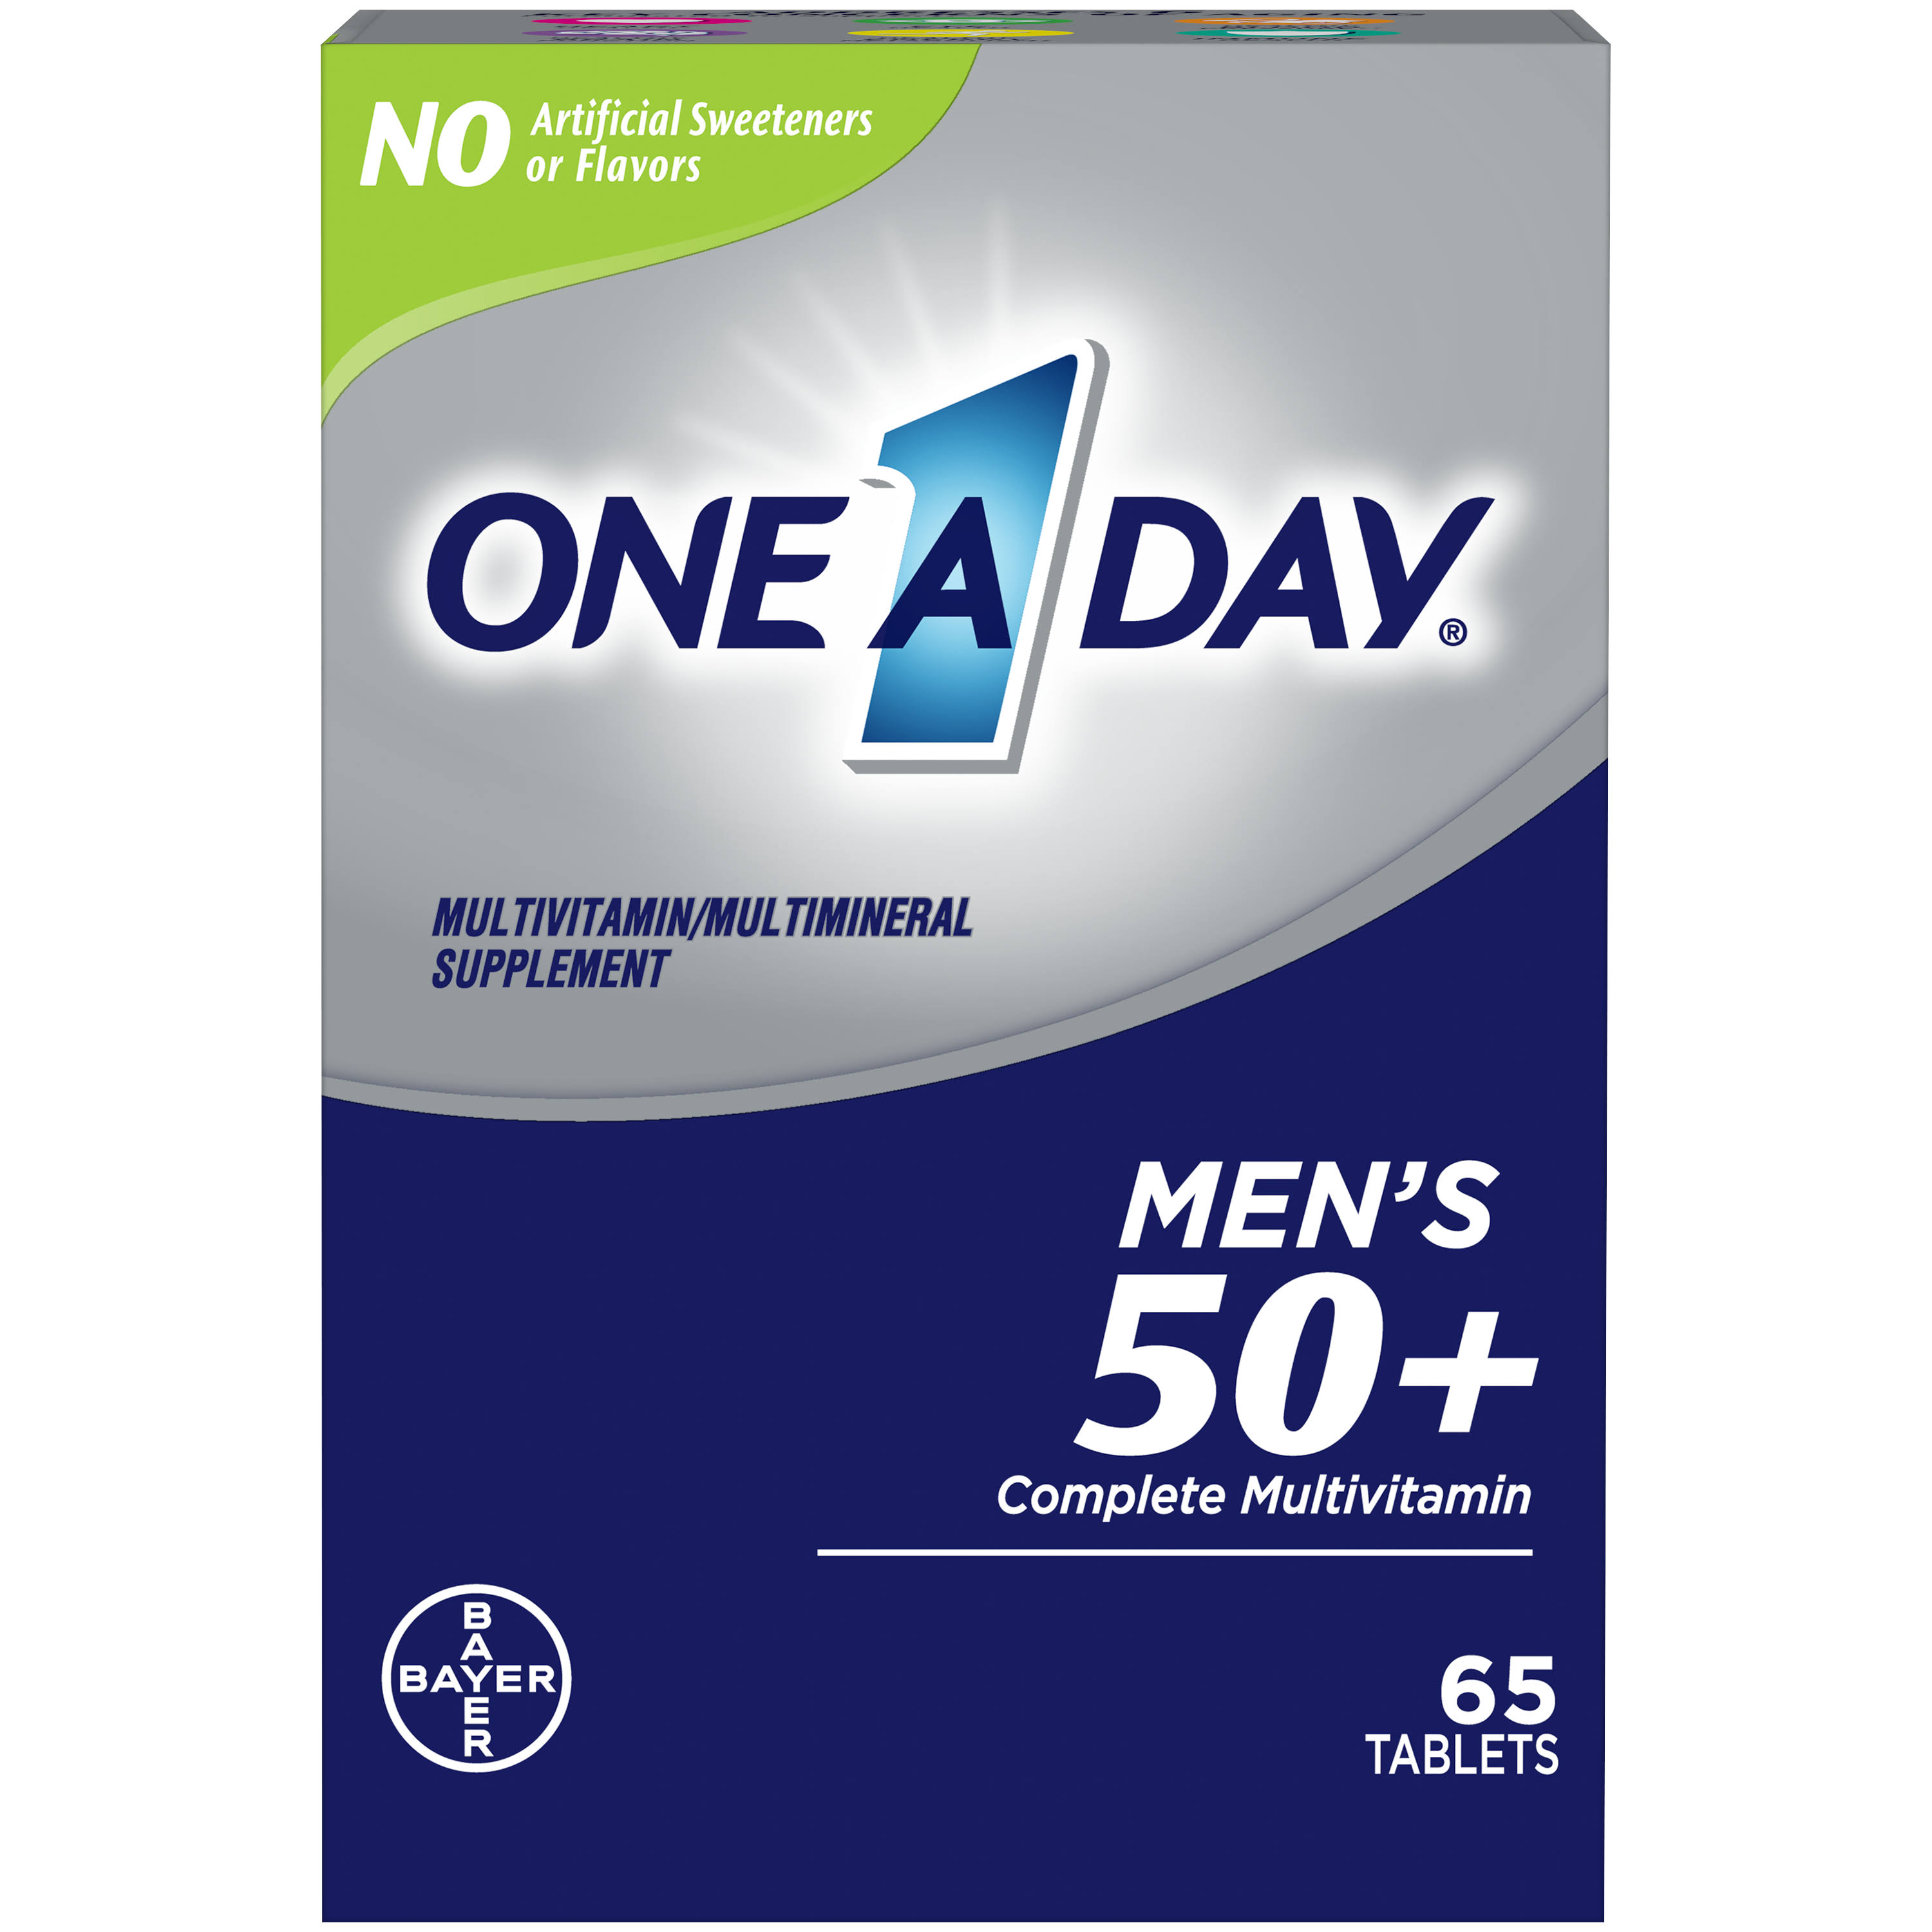 One A Day Multivitamin/Multimineral Supplement, Multivitamin, Complete, Men's 50+, Tablets - 65 tablets